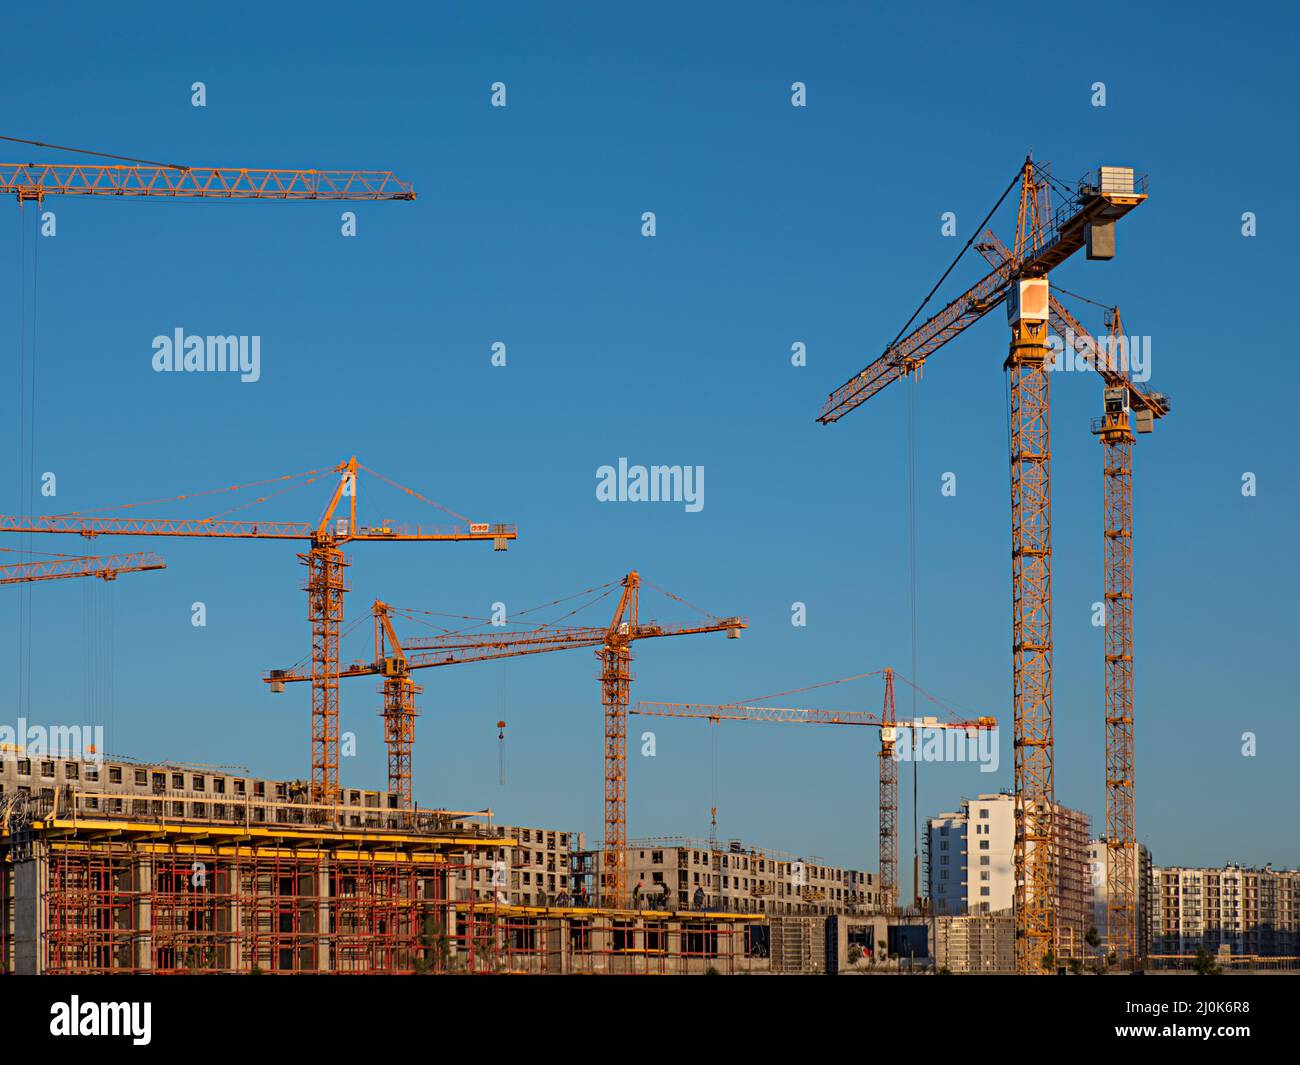 Some tower cranes on background of blue sky and Industrial workers and builders with hardhat in uniform pour concrete at construction site Stock Photo